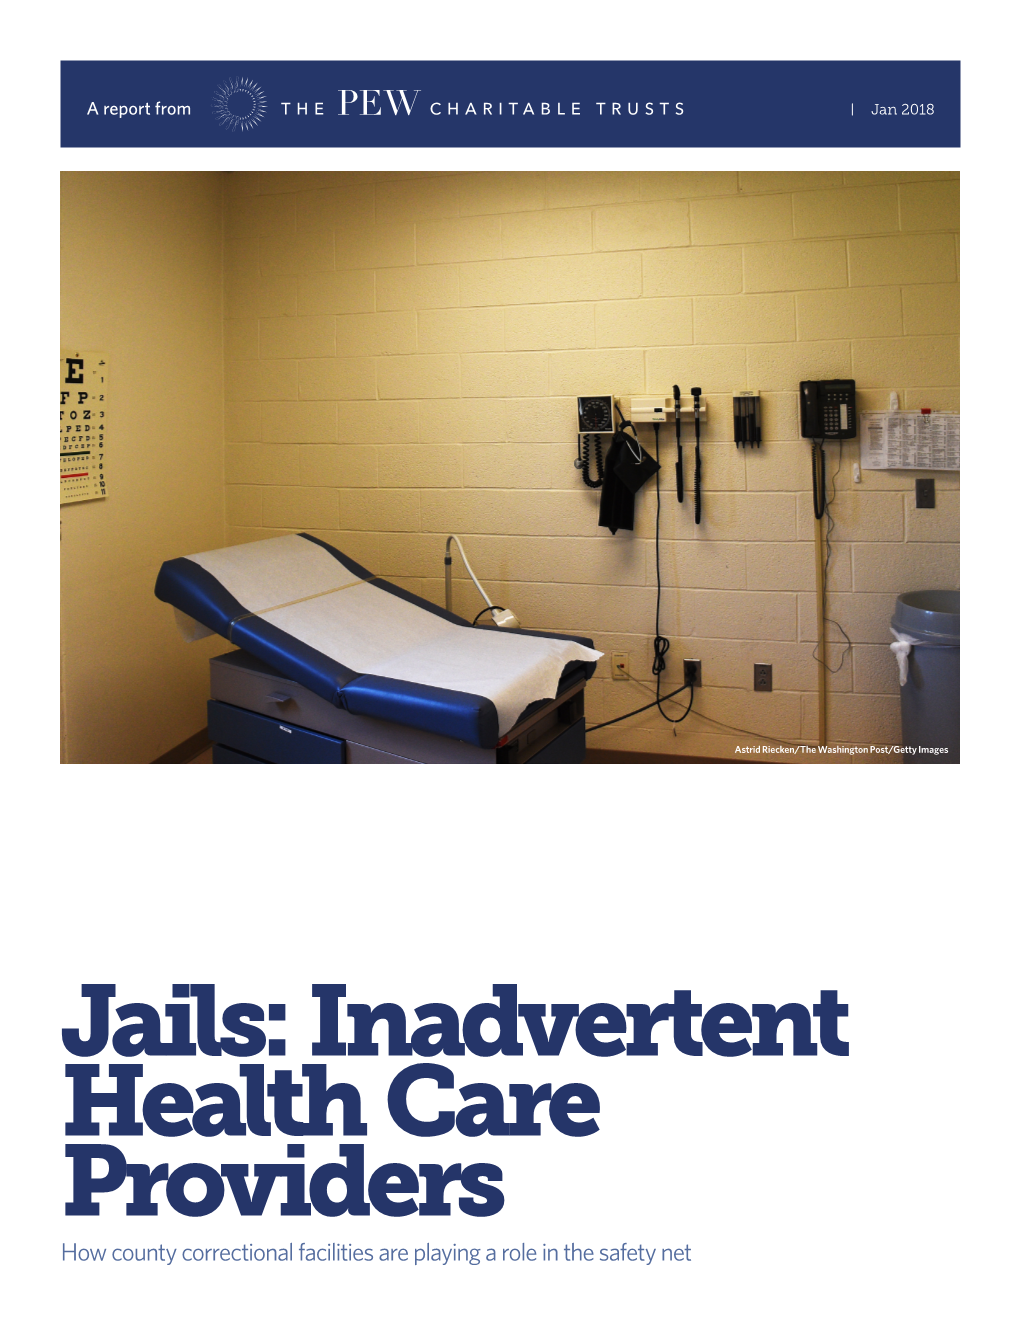 Jails: Inadvertent Health Care Providers How County Correctional Facilities Are Playing a Role in the Safety Net Contents